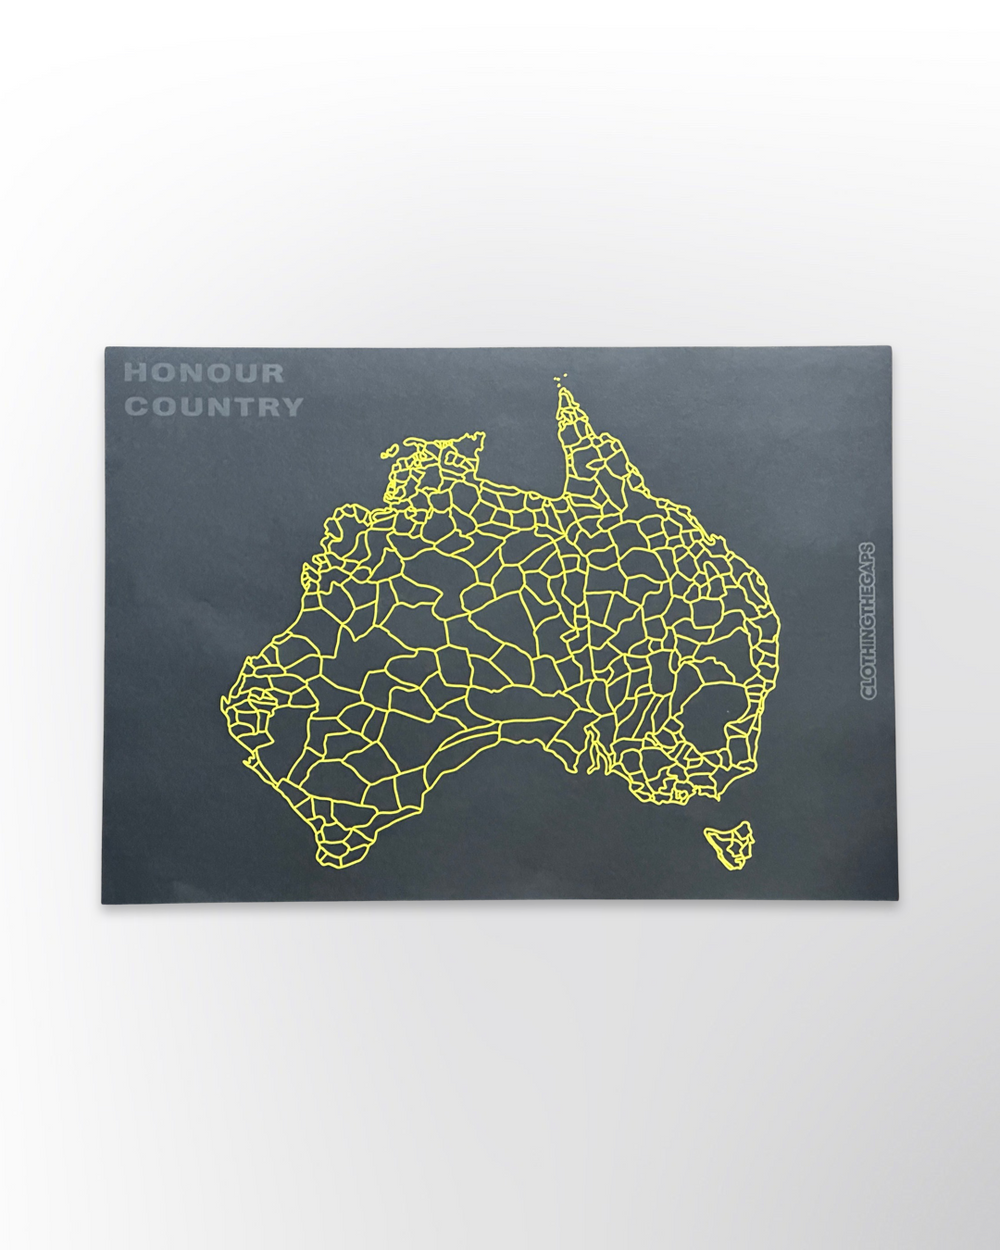 Clothing The Gaps. Decolonised Map Poster DIGITAL DOWNLOAD. Black background with bright yellow large decolonized map of Australia showing all 260 First Nations groups and 'Honour Country' in the top left corner in a grey.